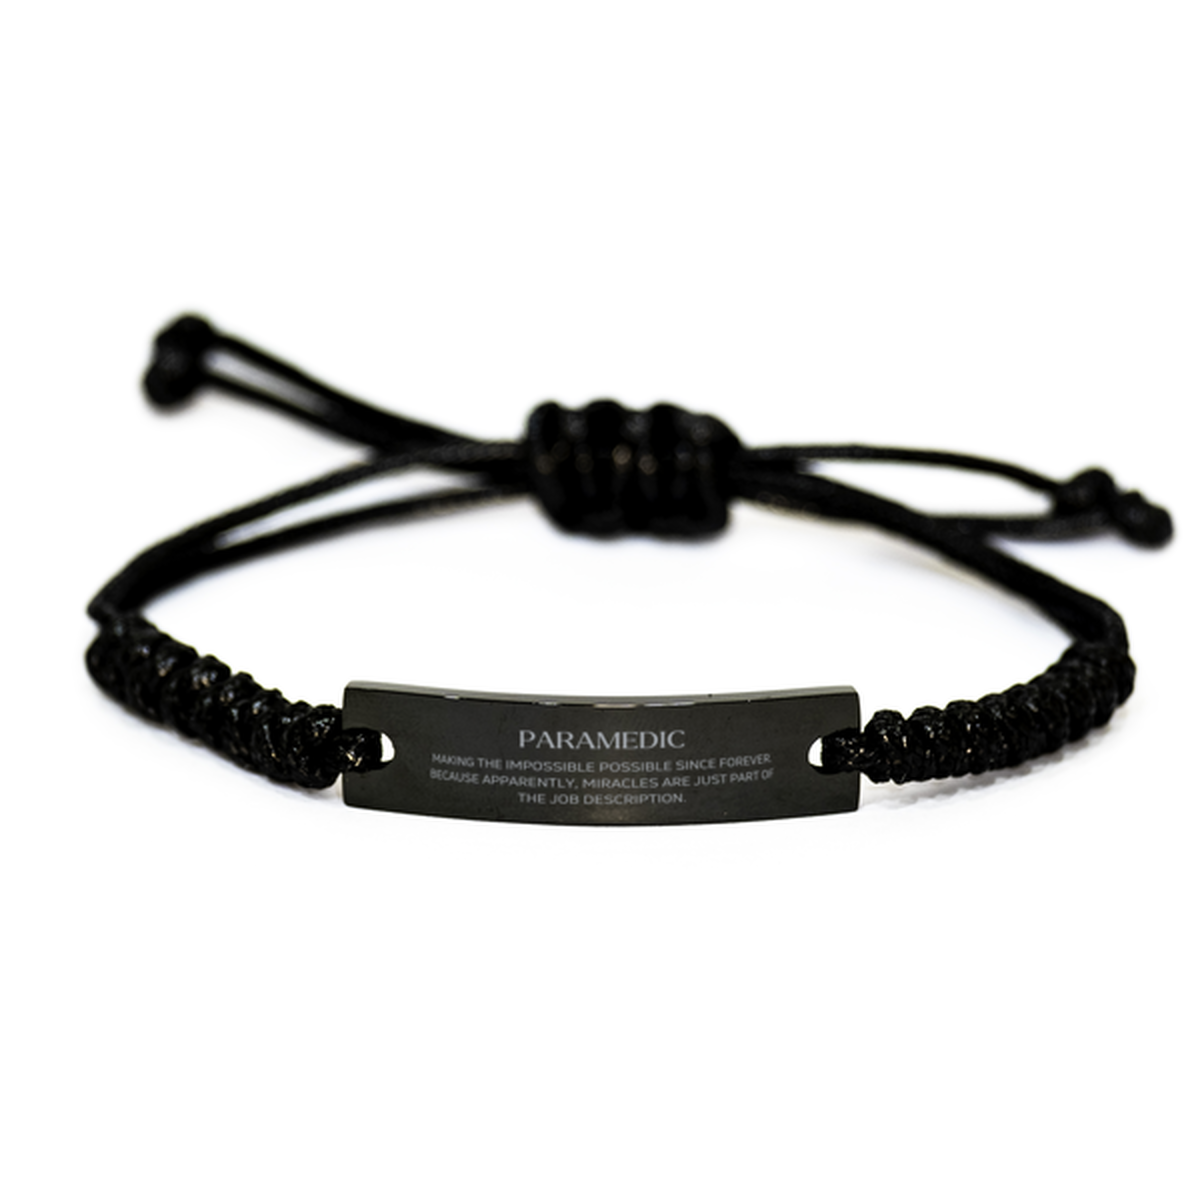 Funny Paramedic Gifts, Miracles are just part of the job description, Inspirational Birthday Black Rope Bracelet For Paramedic, Men, Women, Coworkers, Friends, Boss